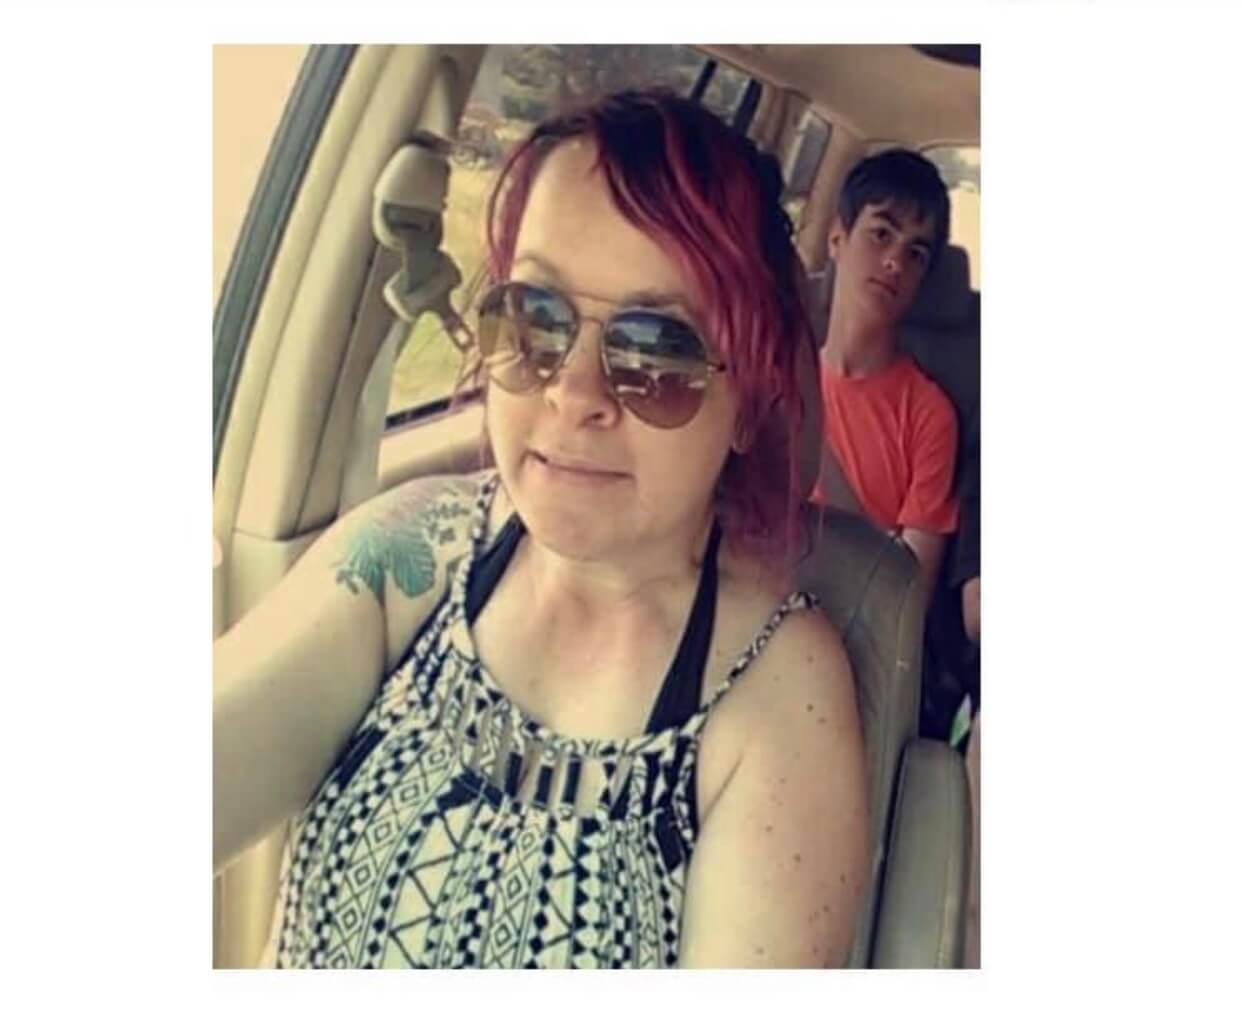 Police and CrimeStoppers issue missing person alert for North MS woman